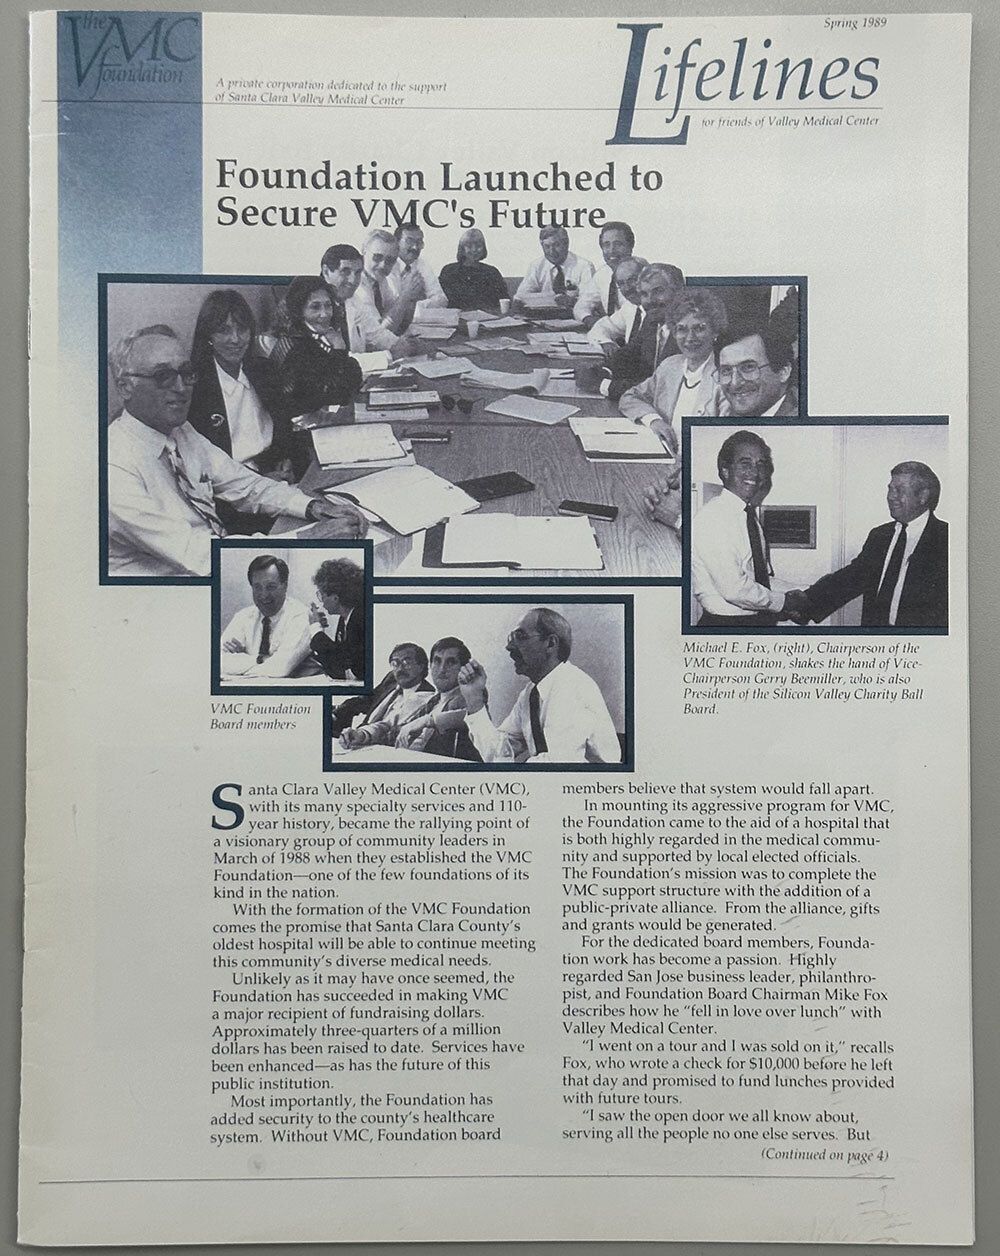 1988*Valley Medical Center Foundation is founded